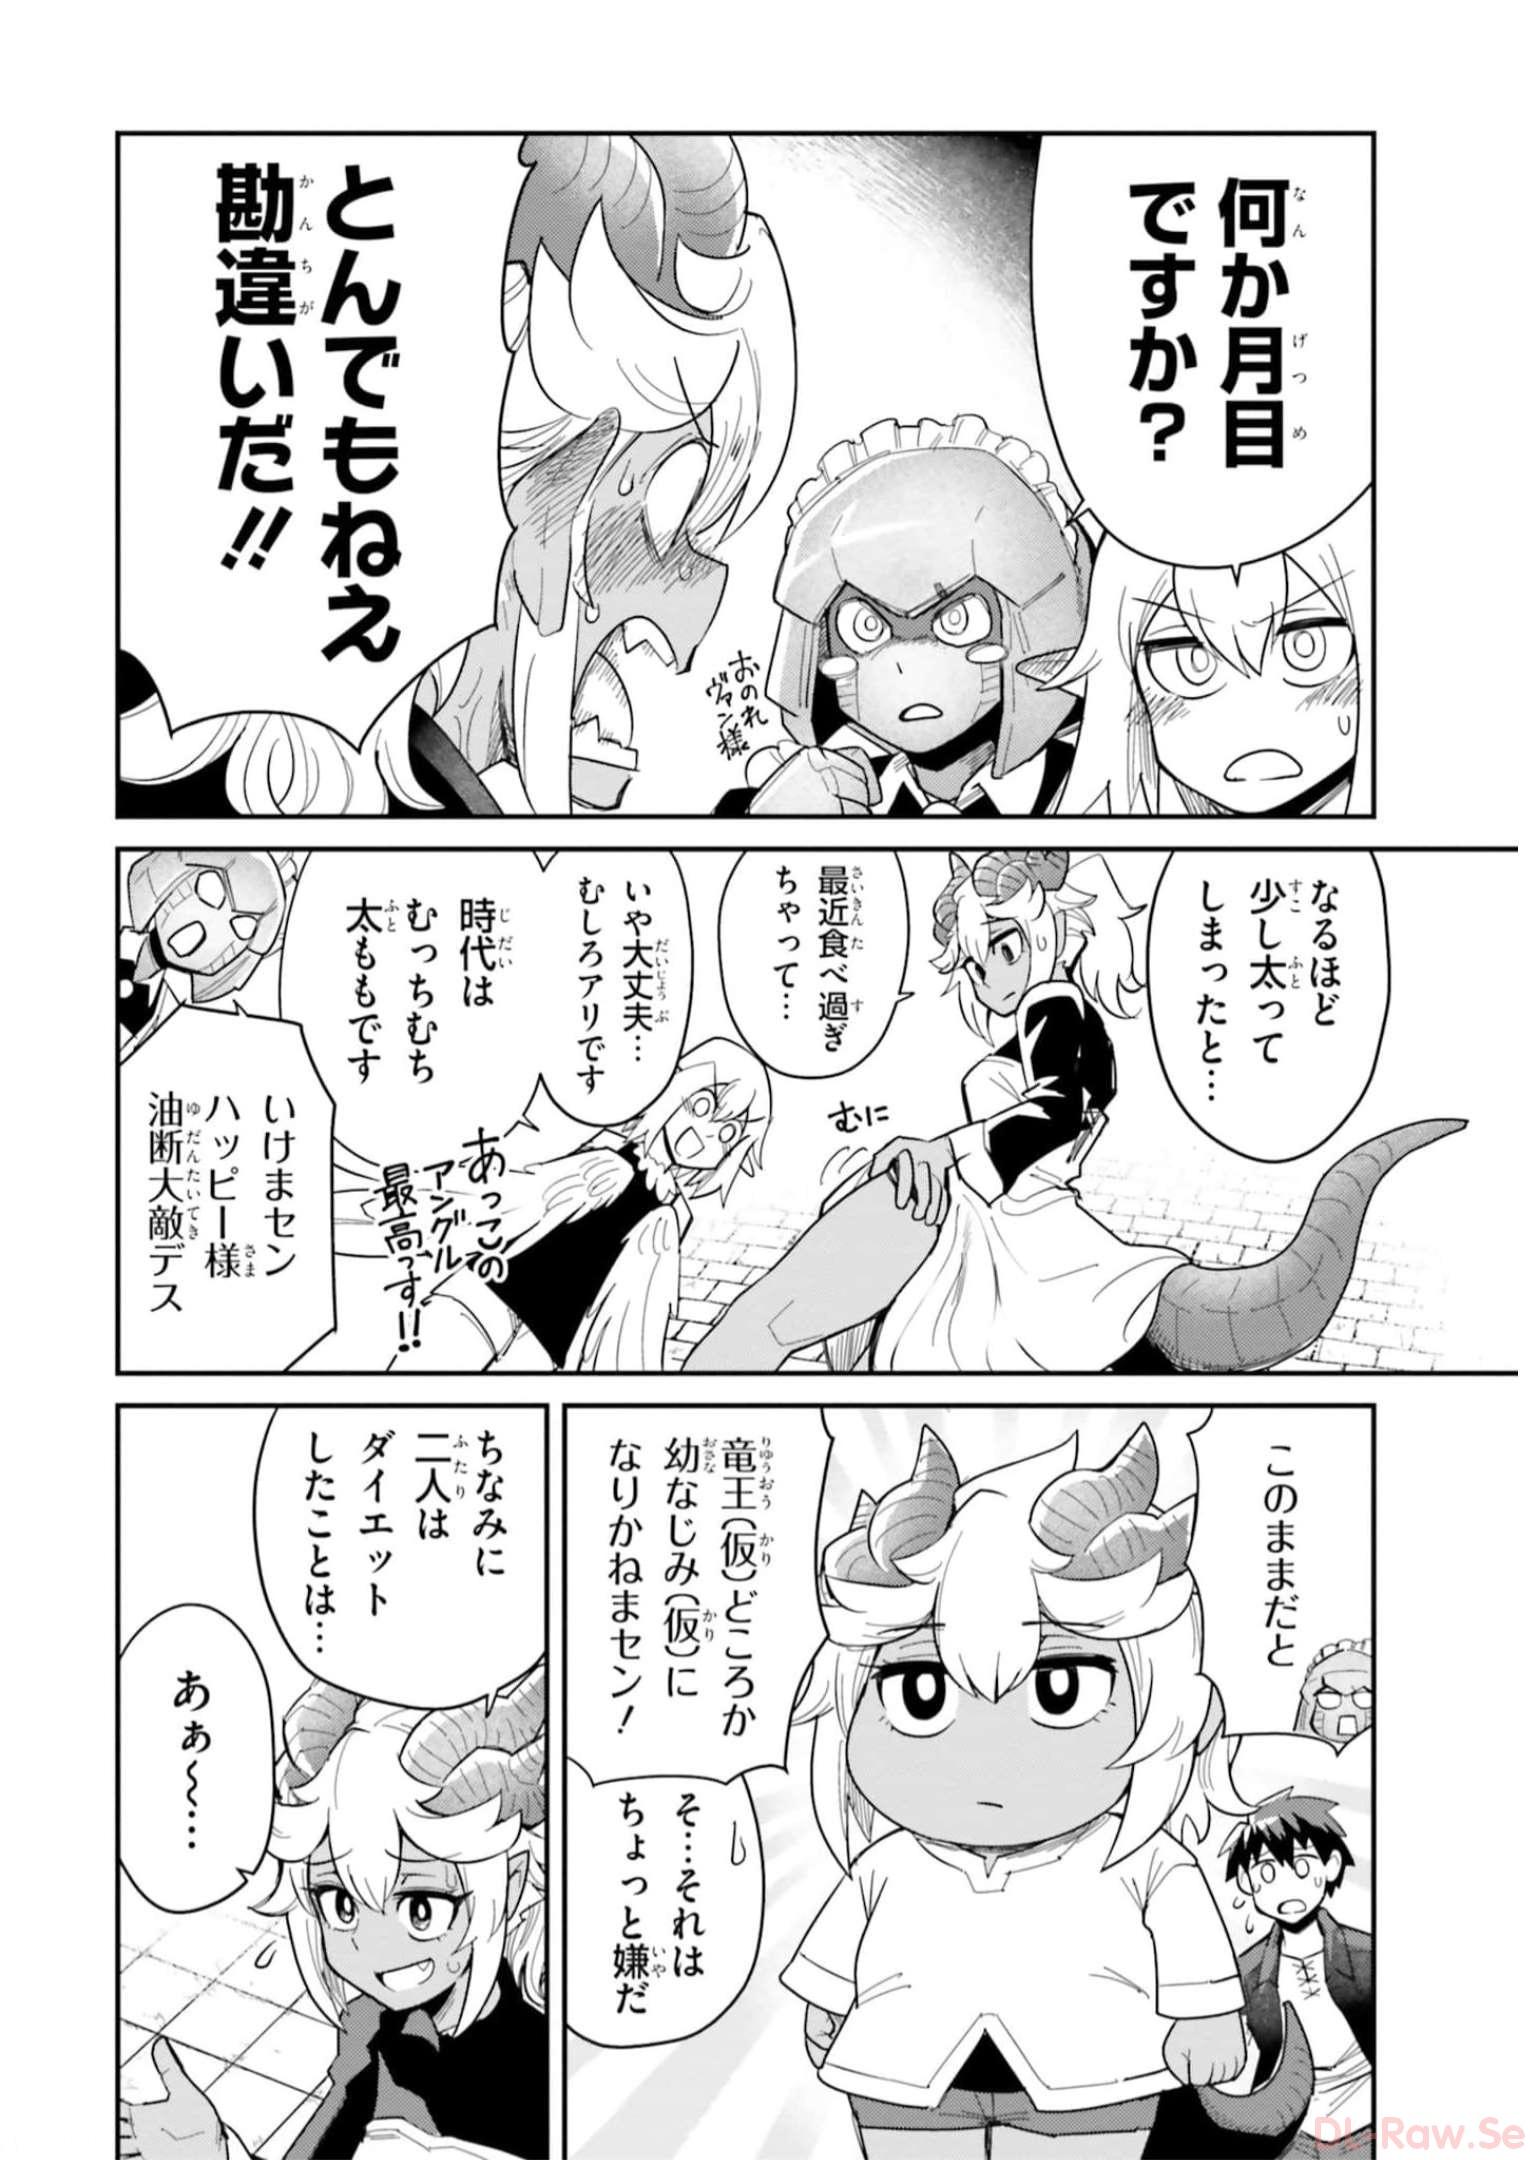 Dungeon Friends Forever Dungeon’s Childhood Friend ダンジョンの幼なじみ 第24話 - Page 4